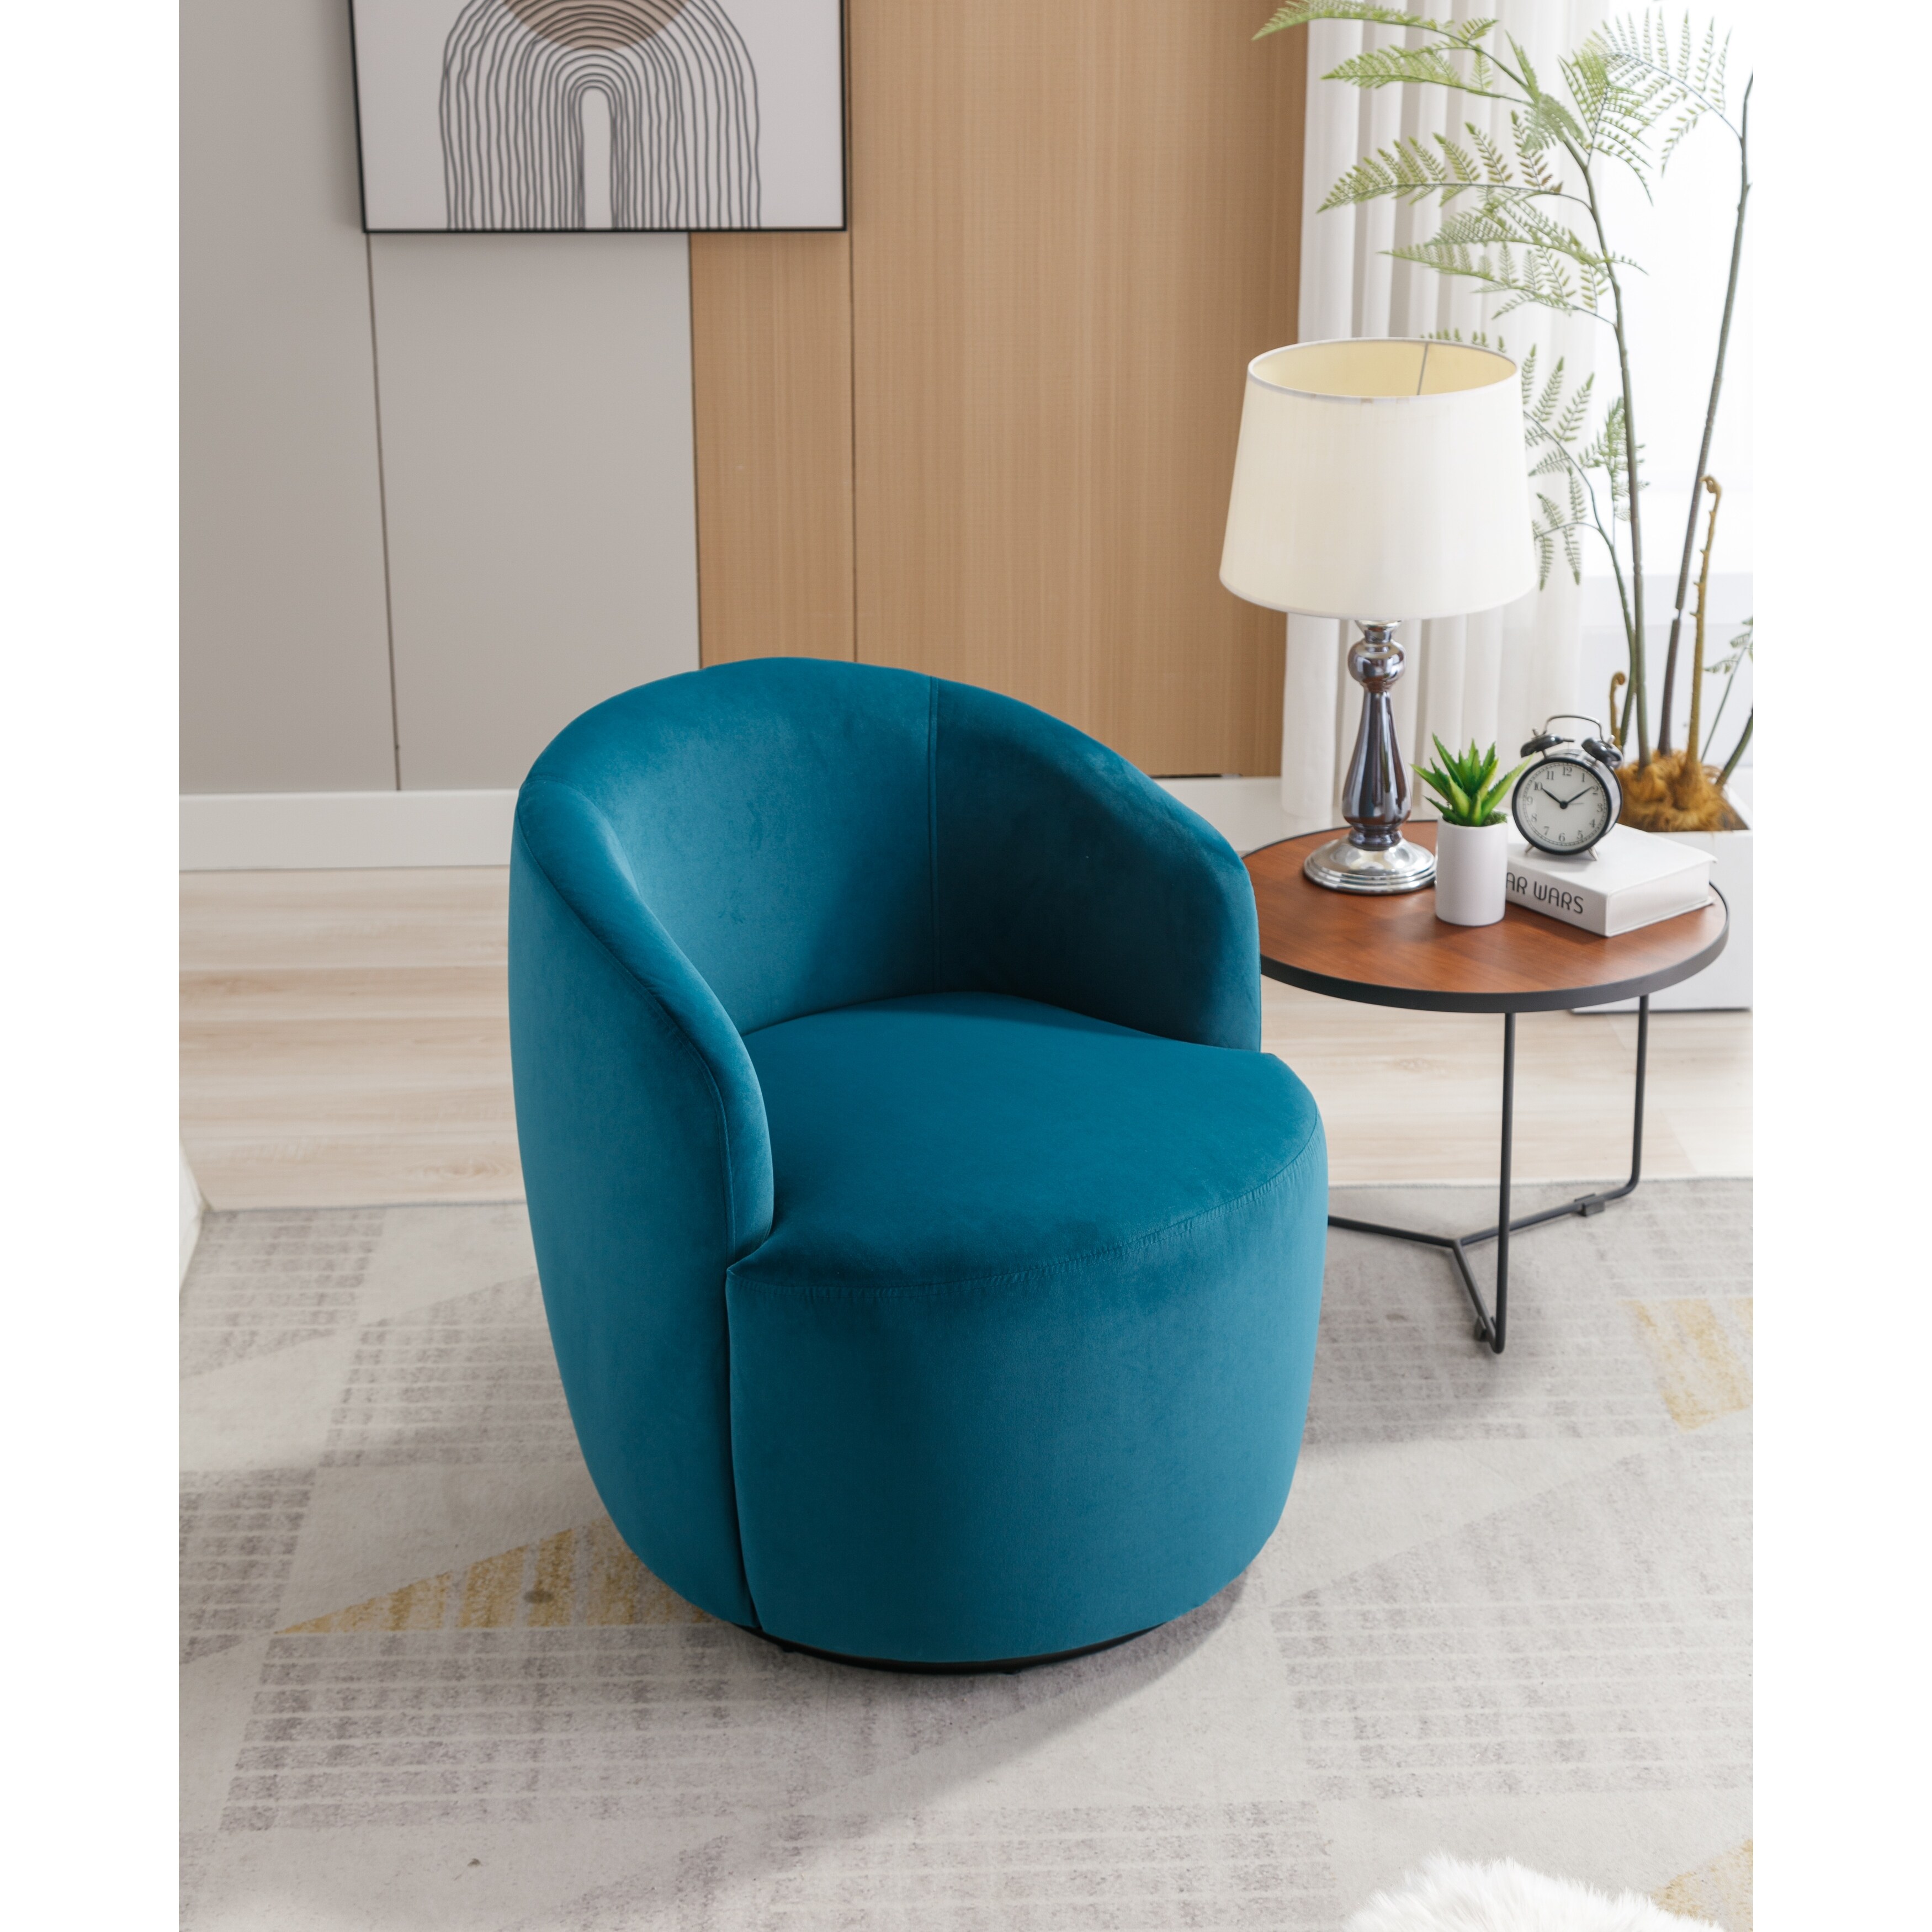 Coaster Donut Shaped Accent Chair in Blue  Sectional sofa with recliner,  Round coffee table living room, Accent chairs for sale